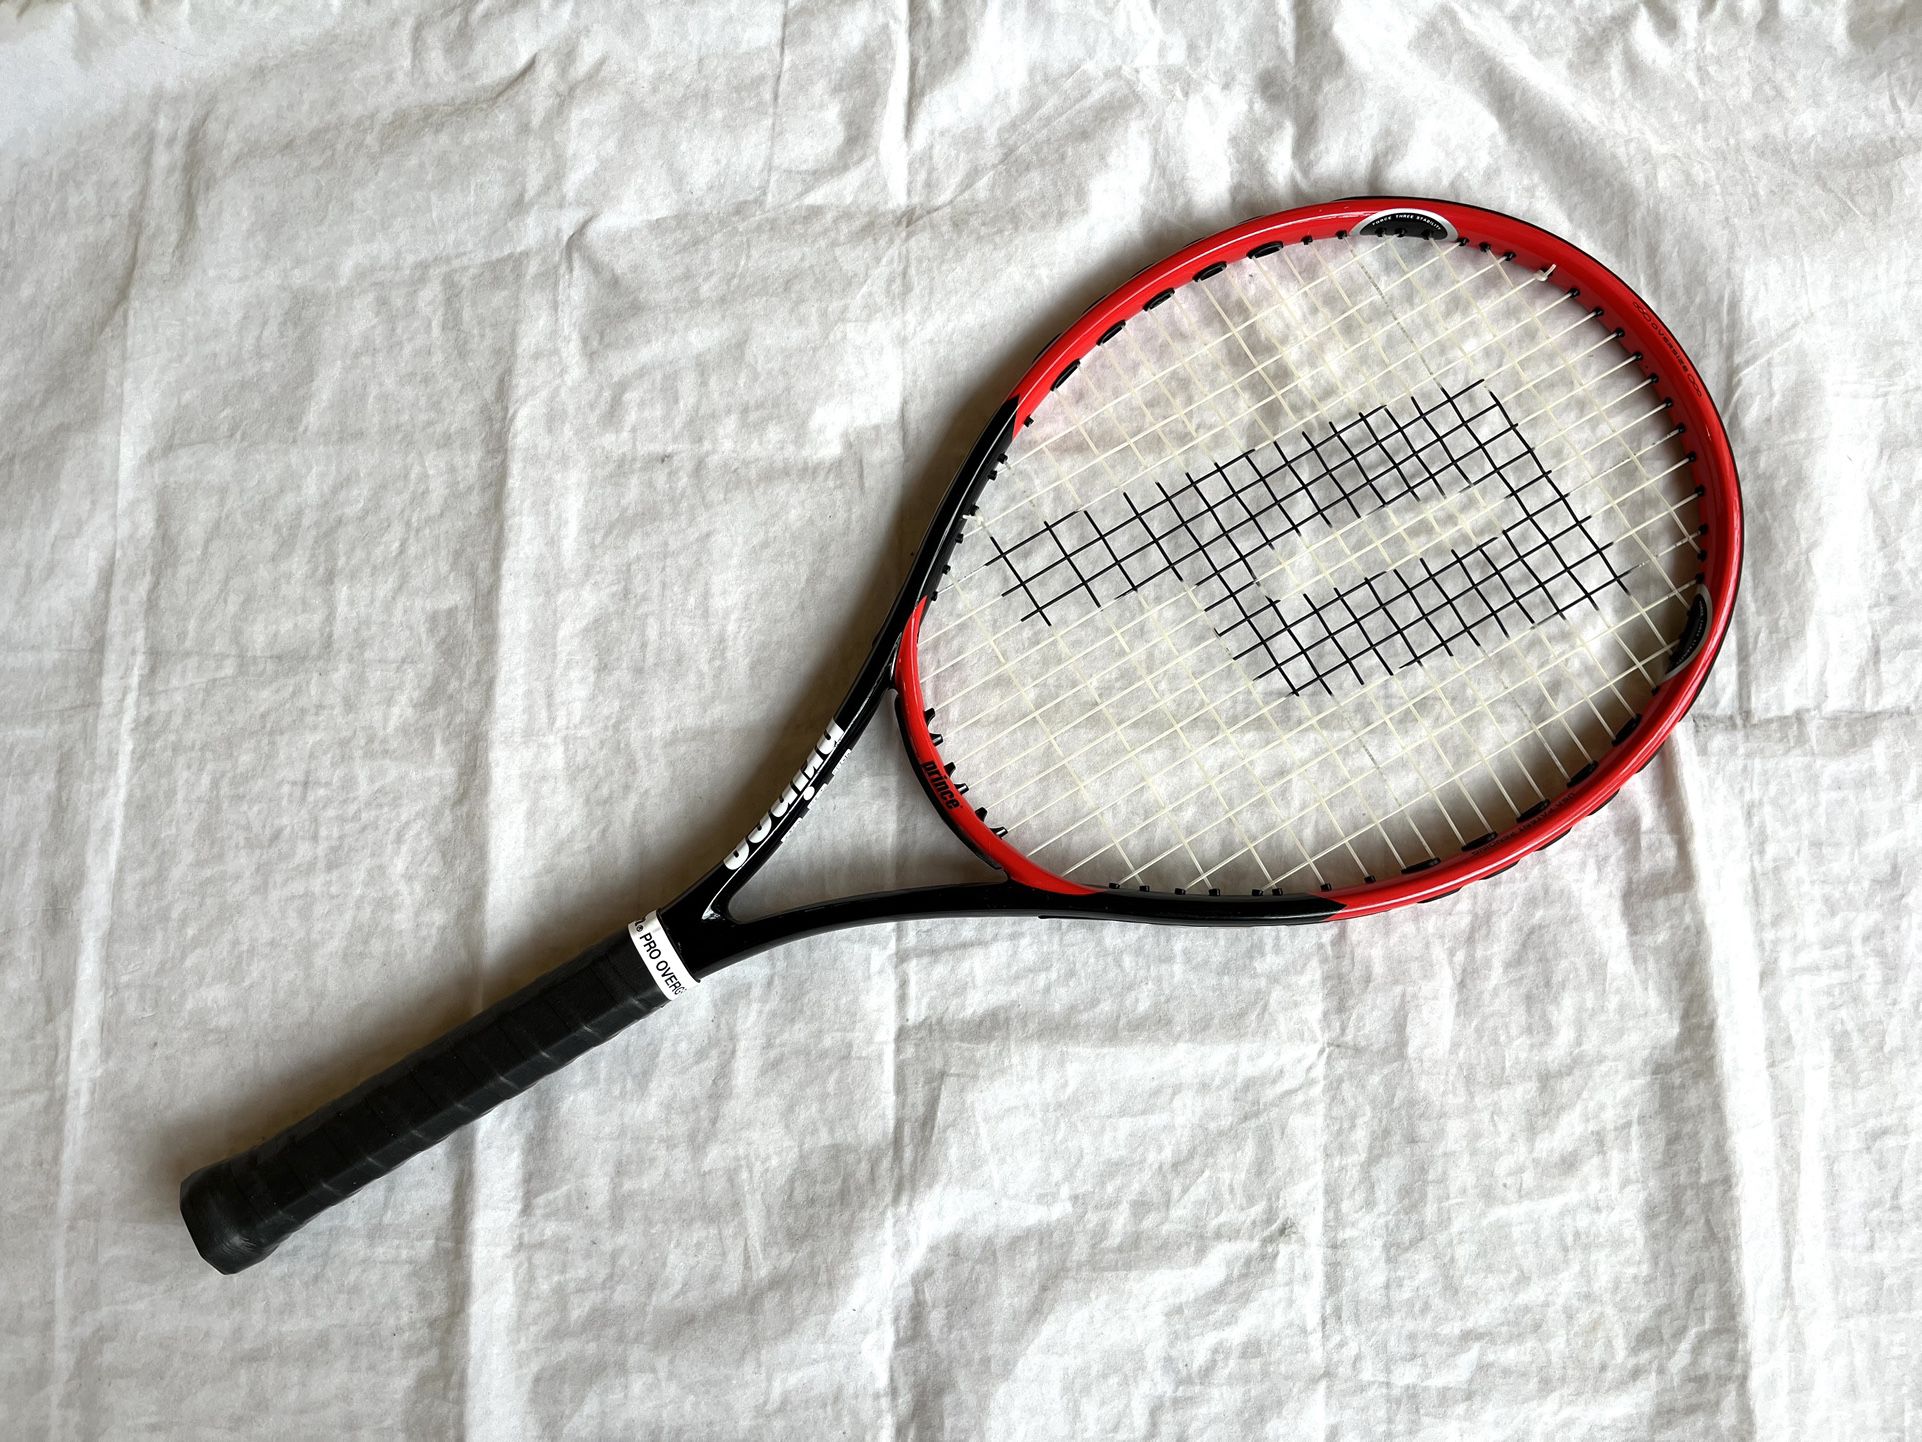 Prince Air Rival Oversize Tennis Racquet / Racket - PRICE FIRM